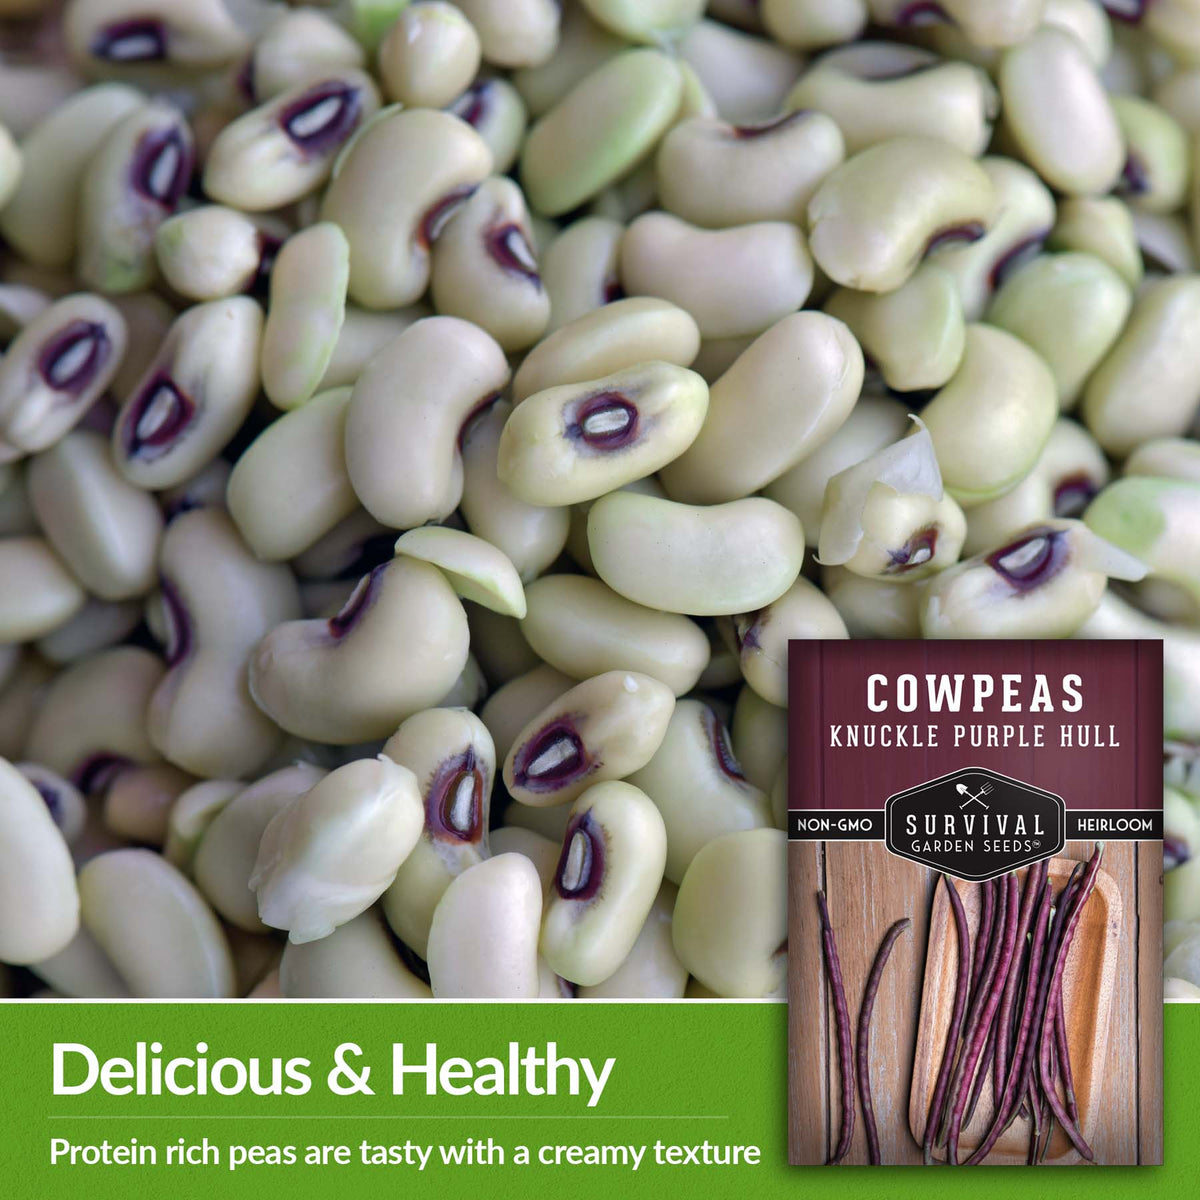 Knuckle Purple Hull Cowpeas are protein rich with a creamy texture